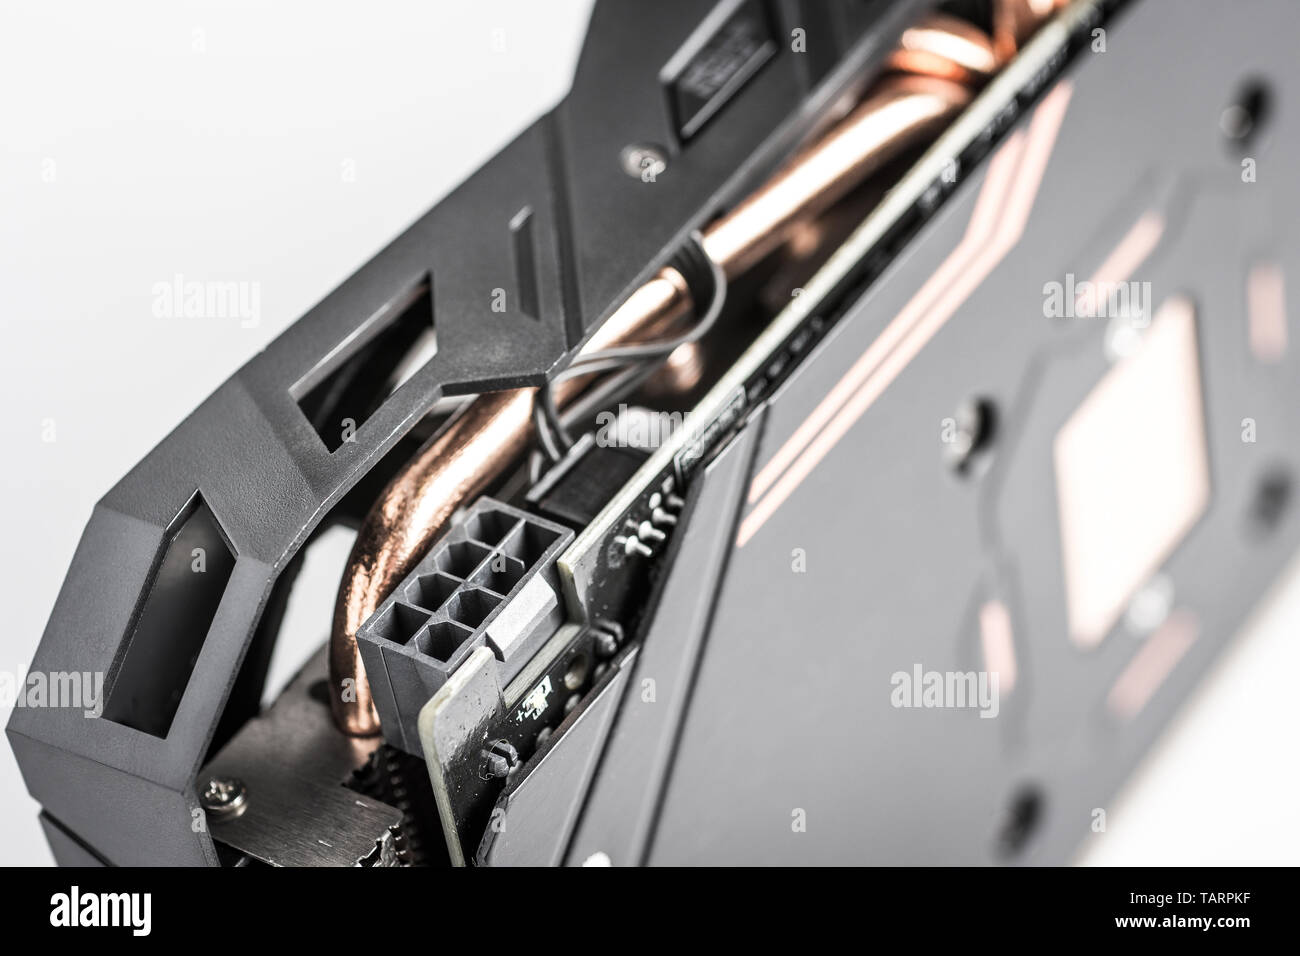 PC Gaming Graphic Card GPU with 8 Pin Power Connectors Stock Photo - Alamy